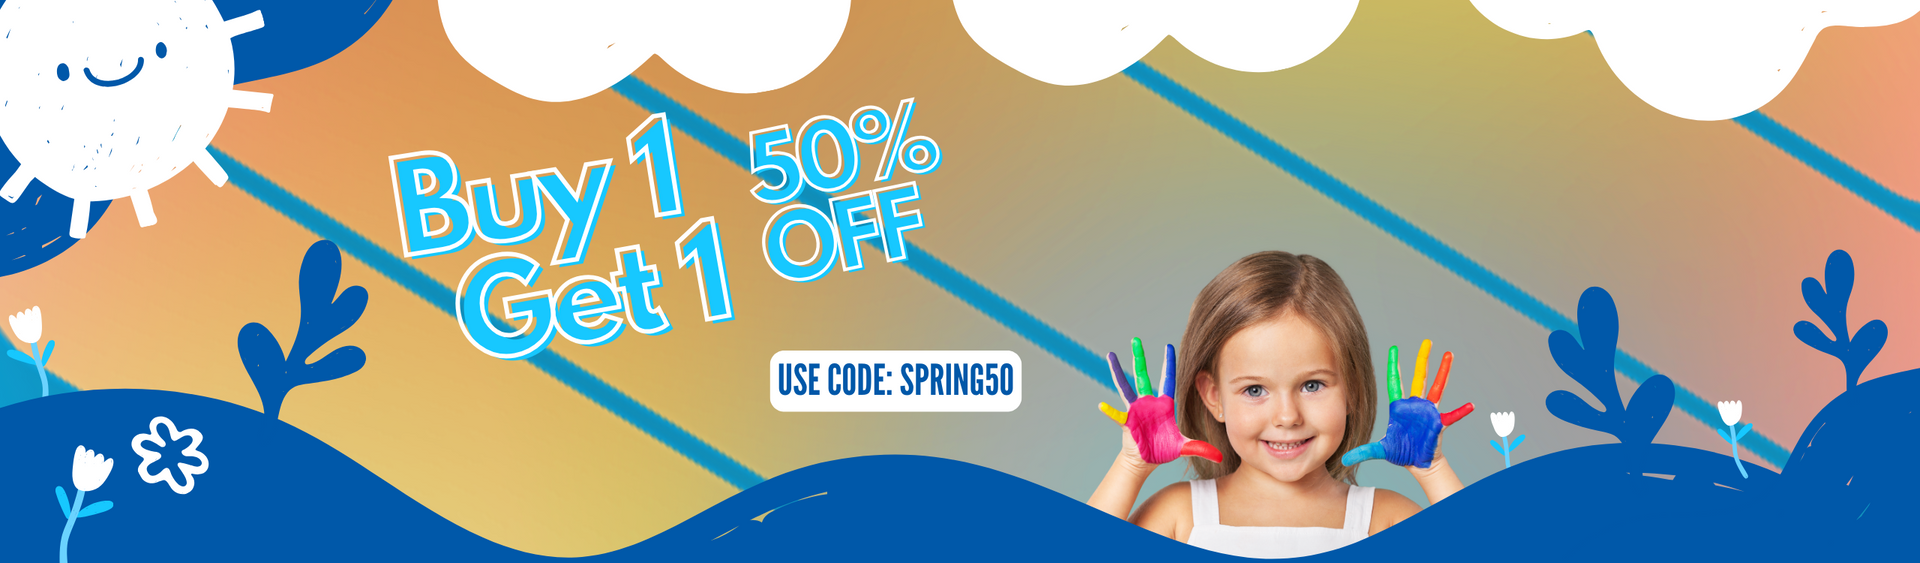 Colorful promotional banner featuring a young girl smiling, holding paint-covered hands up, with a "buy 1 get 1 50% off" offer on Montessori toys, clouds, and